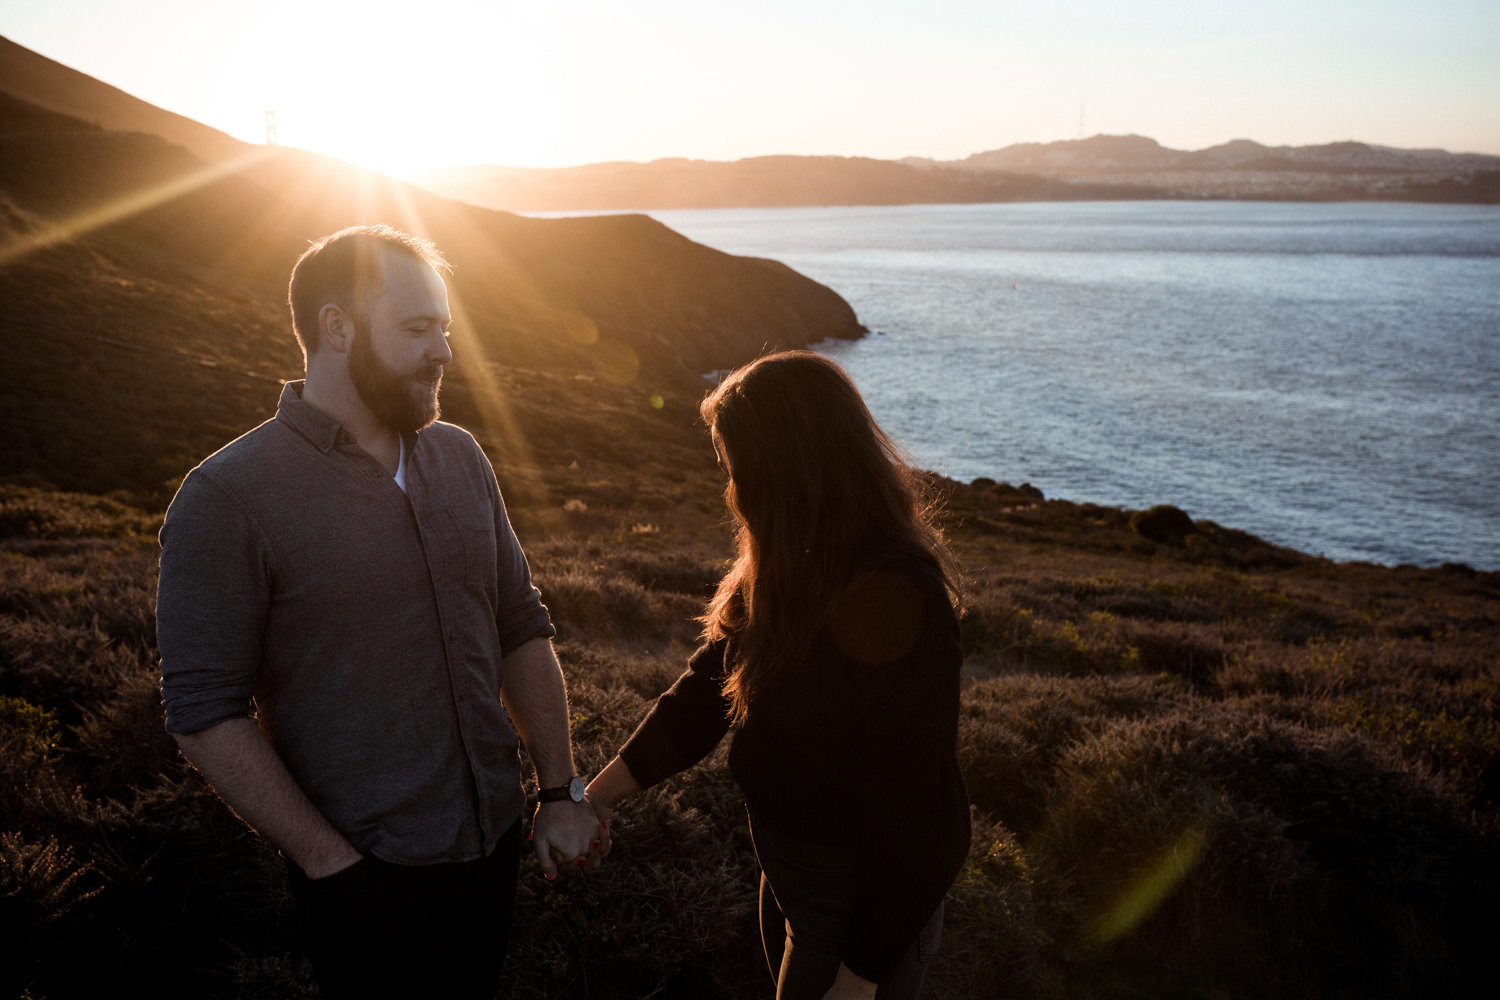 Sunrise Engagement Session at the Marin Headlands in San Francisco California by Danielle Motif Photography